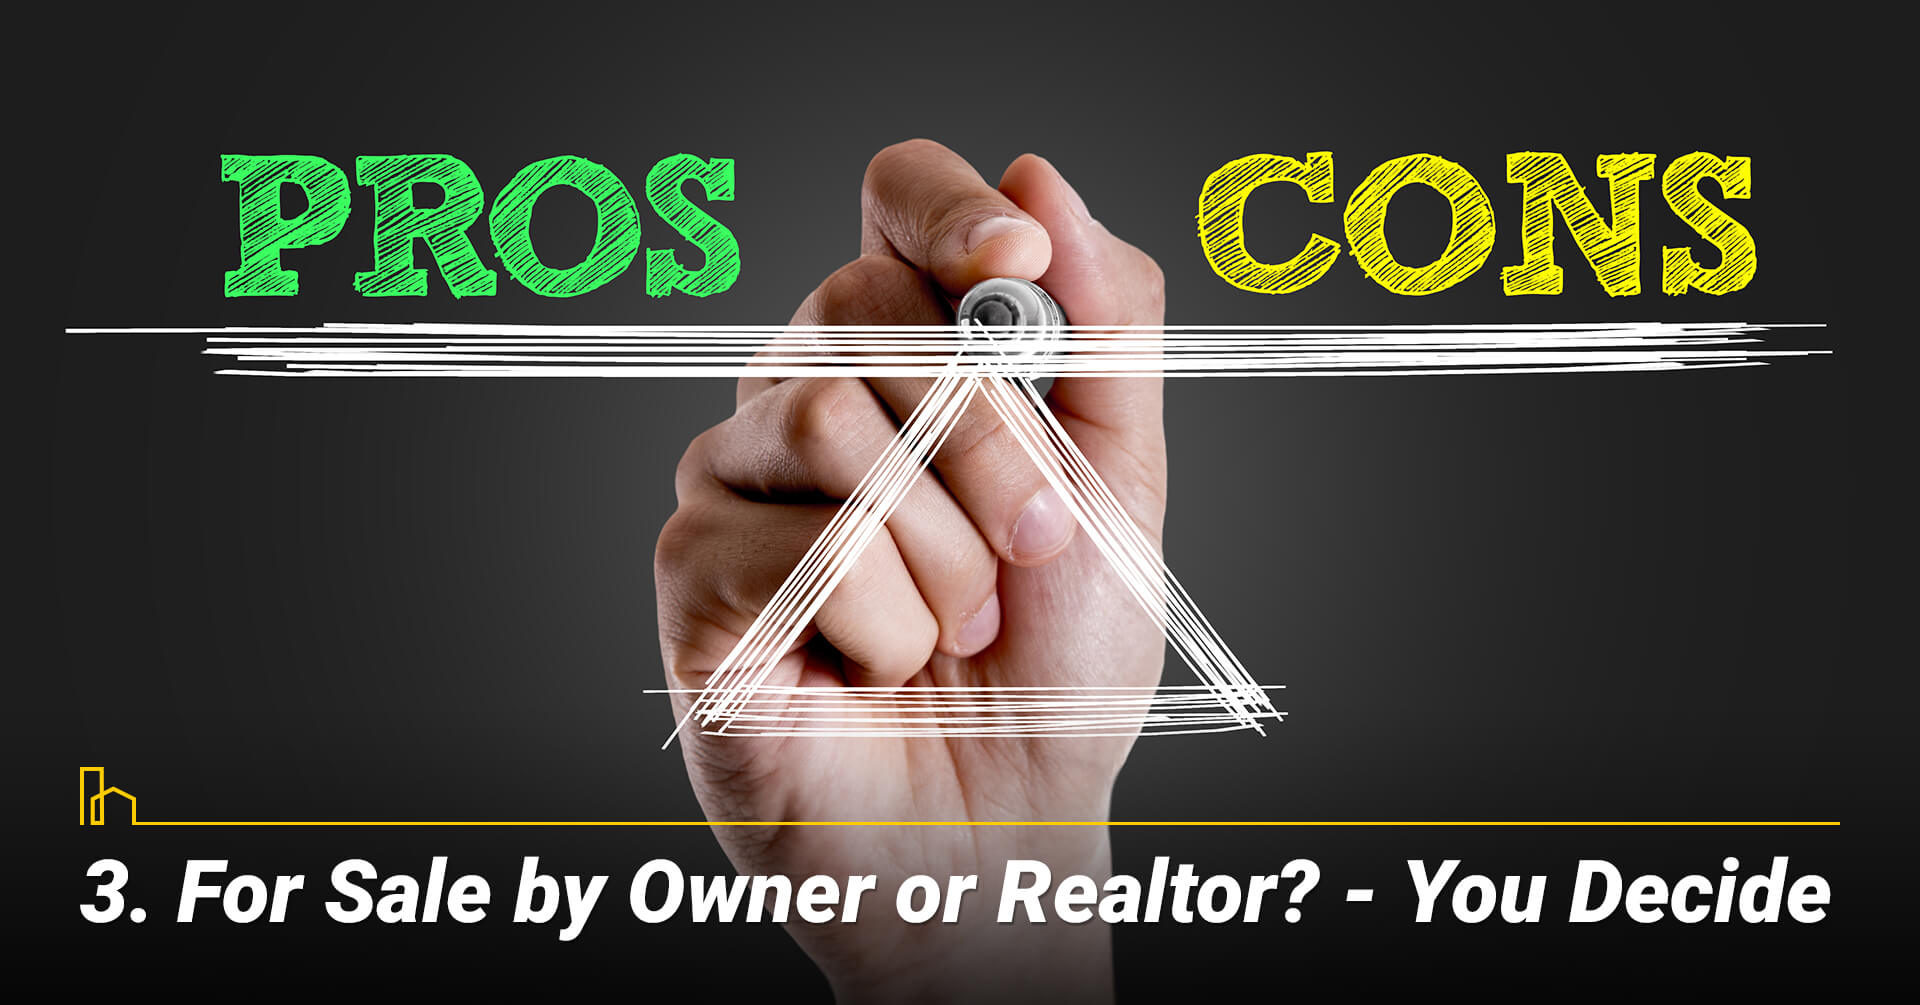 For Sale by Owner or Realtor? — You Decide. Pros and cons of selling your own home